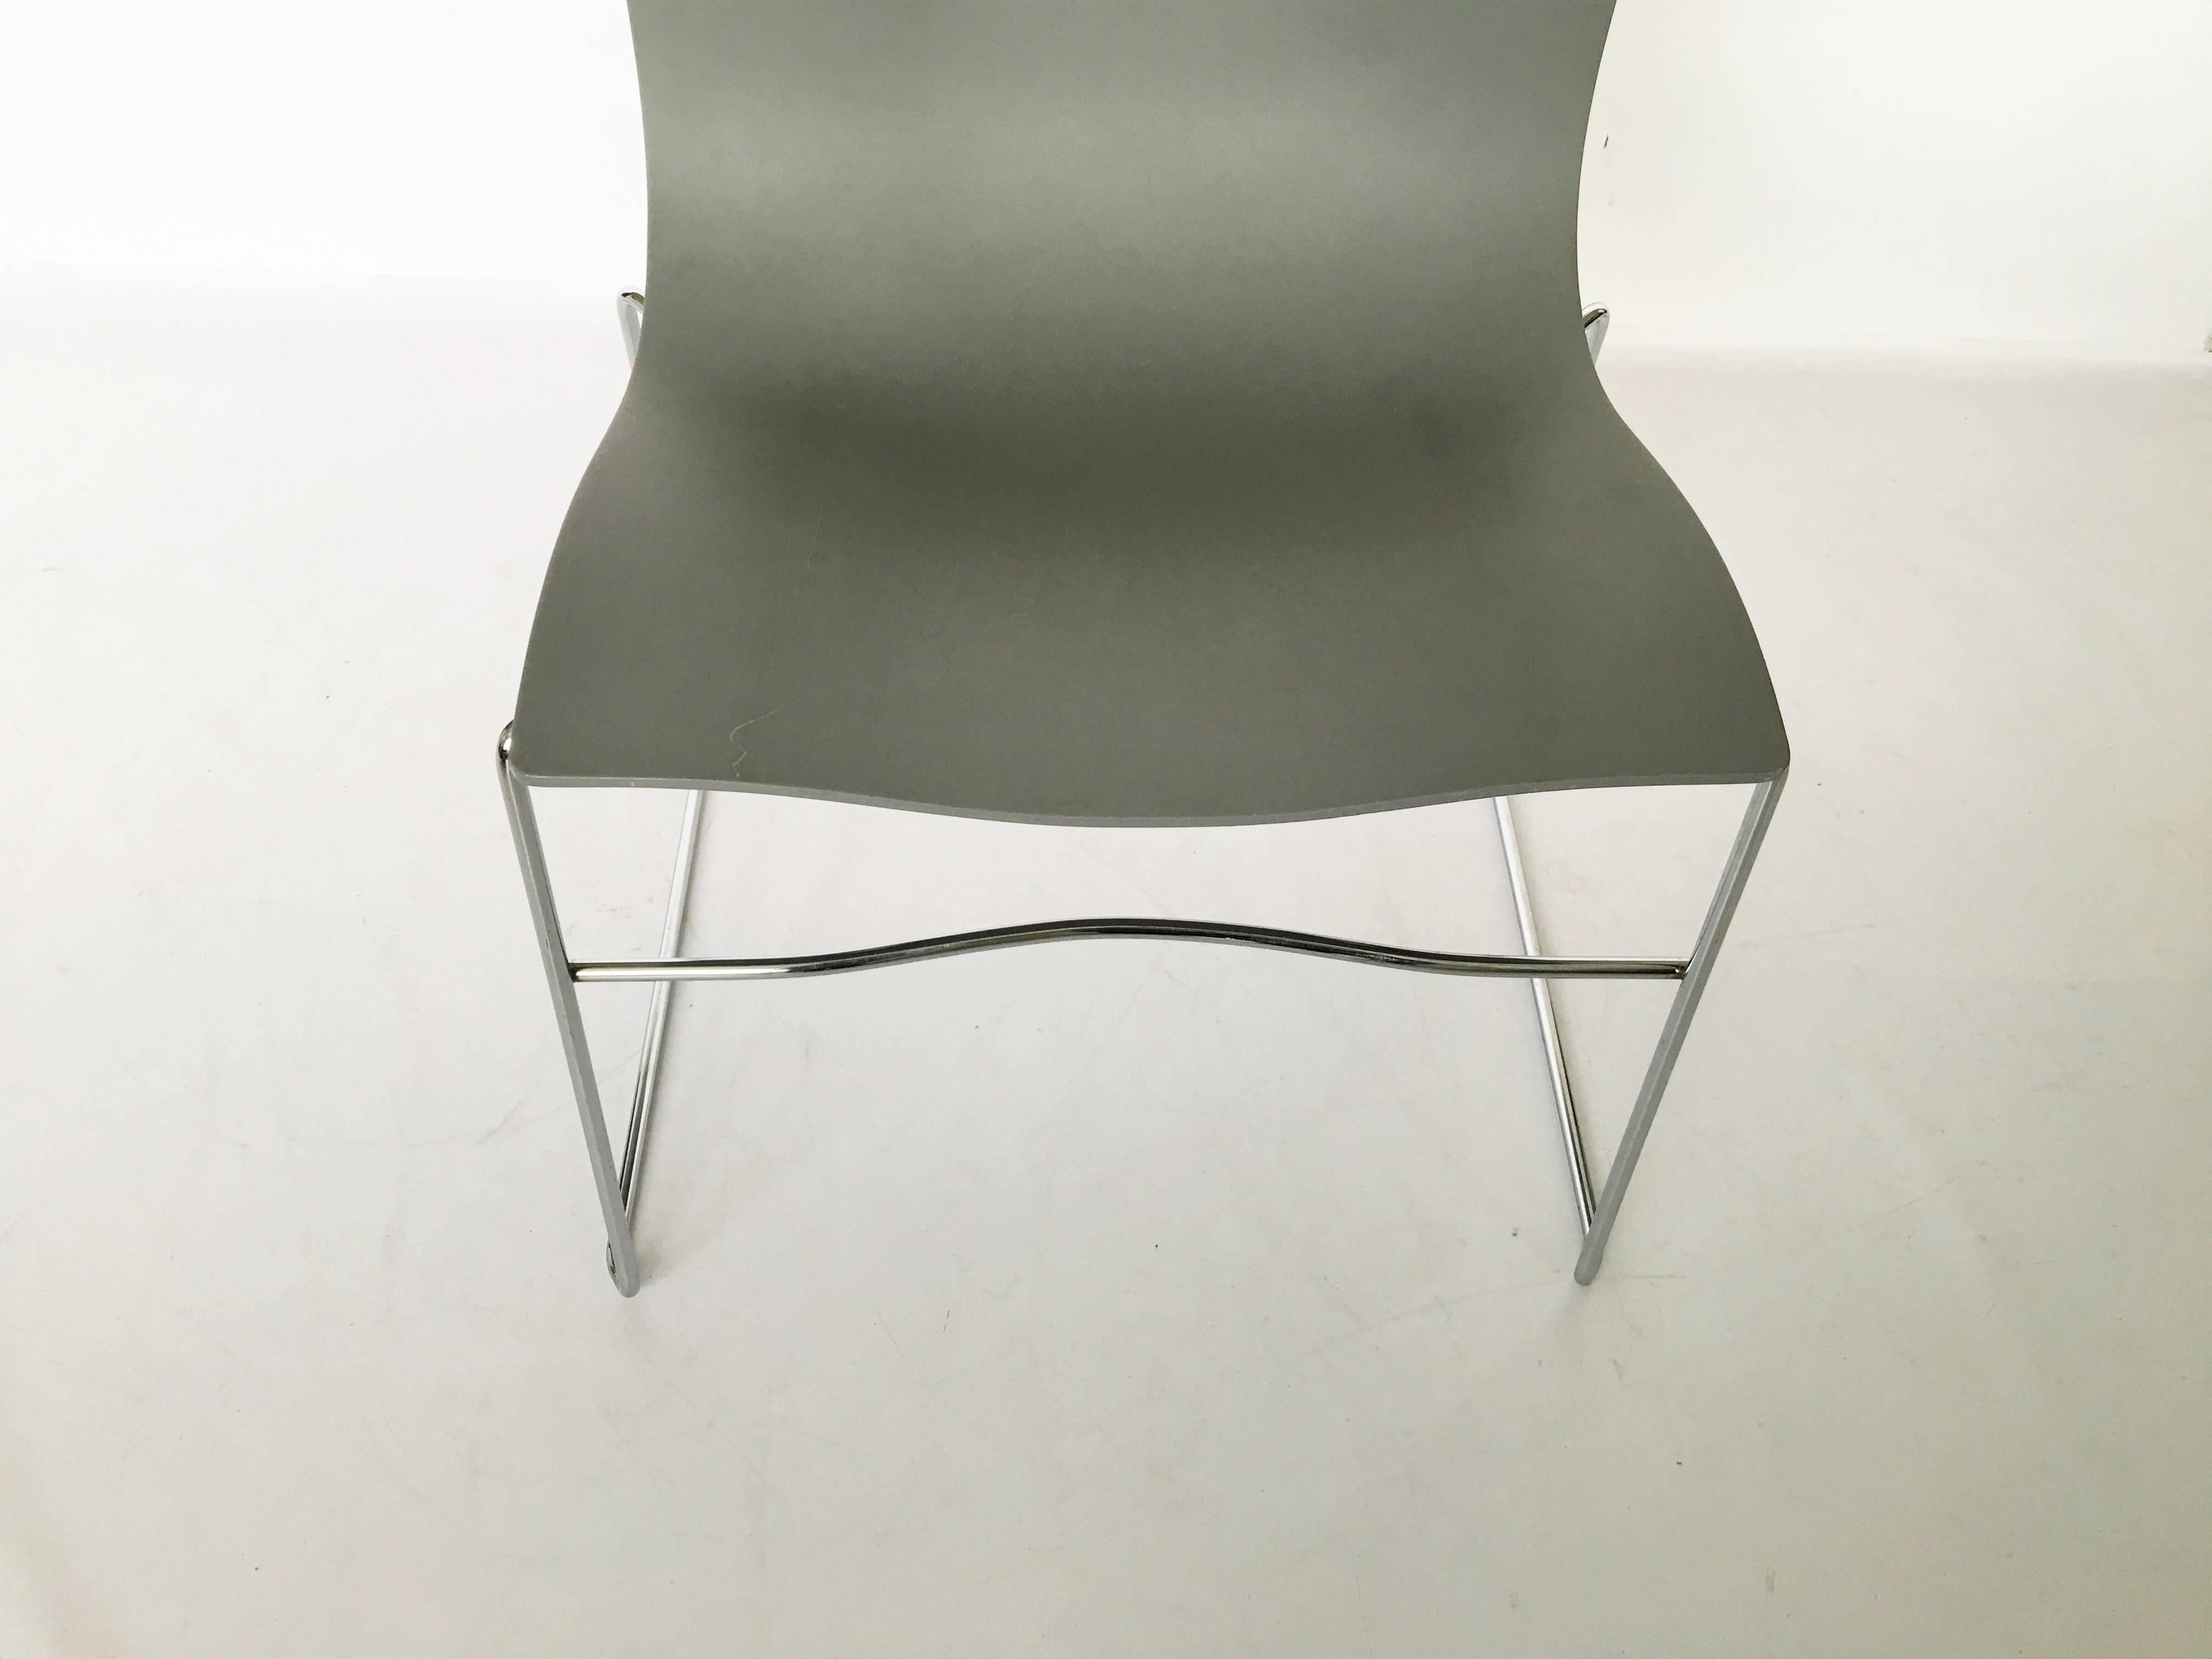 Twenty Massimo Vignelli Handkerchief Chairs for Knoll in Gray For Sale 3